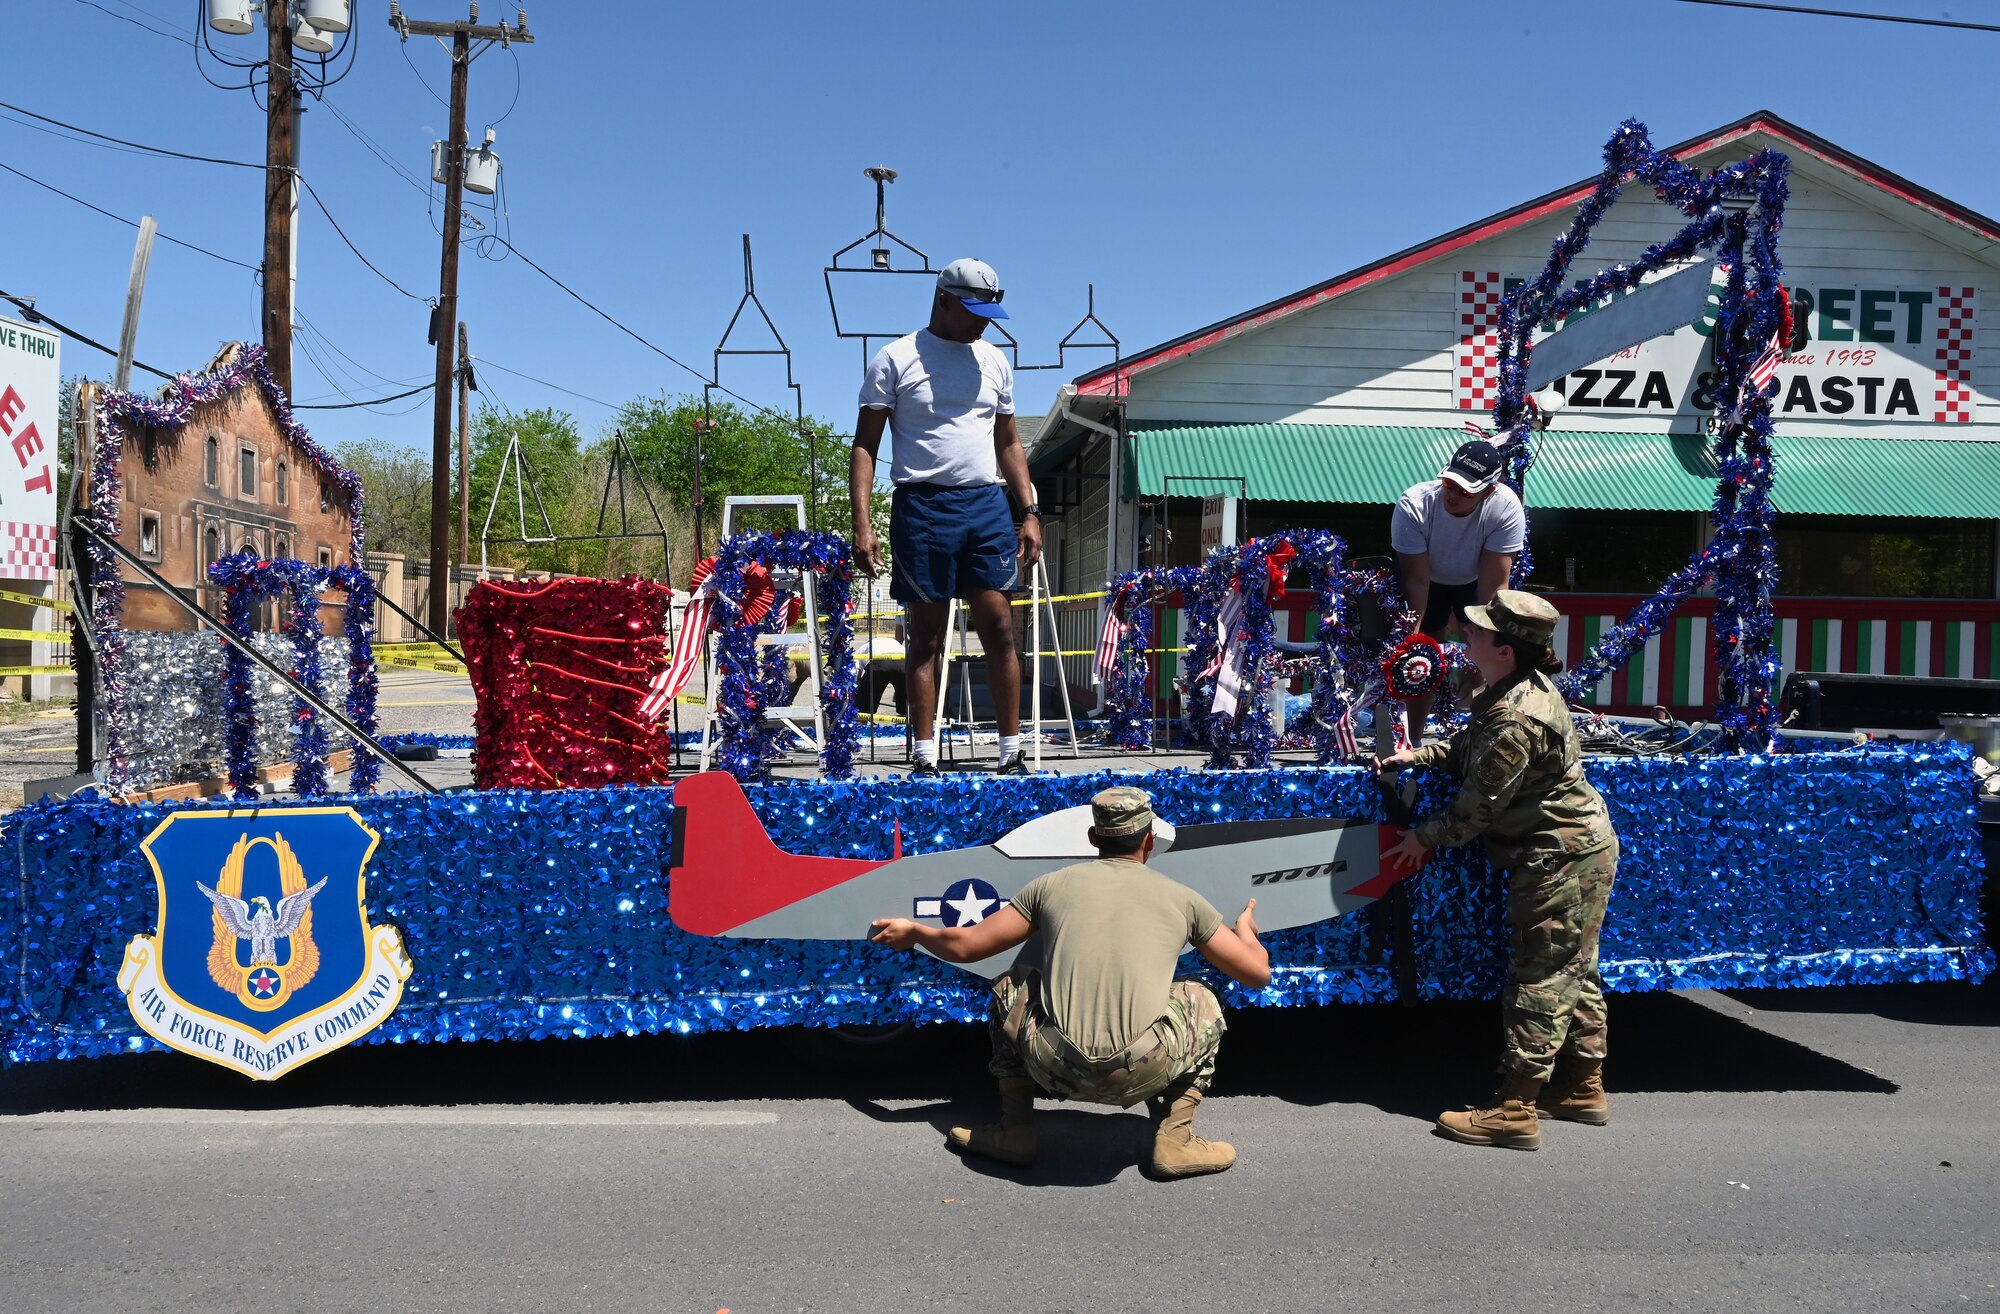 Reserve Citizen Airmen in the 433rd Airlift Wing, 960th Cyberspace Wing, 340th Flying Training Group and 23rd Intelligence Squadron put the finishing touches on the float honoring Senior Master Sgt. James Bynum for the San Antonio Fiesta Flambeau parade April 9, 2022. Bynum, a local Tuskegee Airman who served during WWII, was not able to attend the parade due to unforeseen circumstances but was still highlighted for his service and legacy during the parade. (U.S. Air Force photo by Staff Sgt. Monet Villacorte)